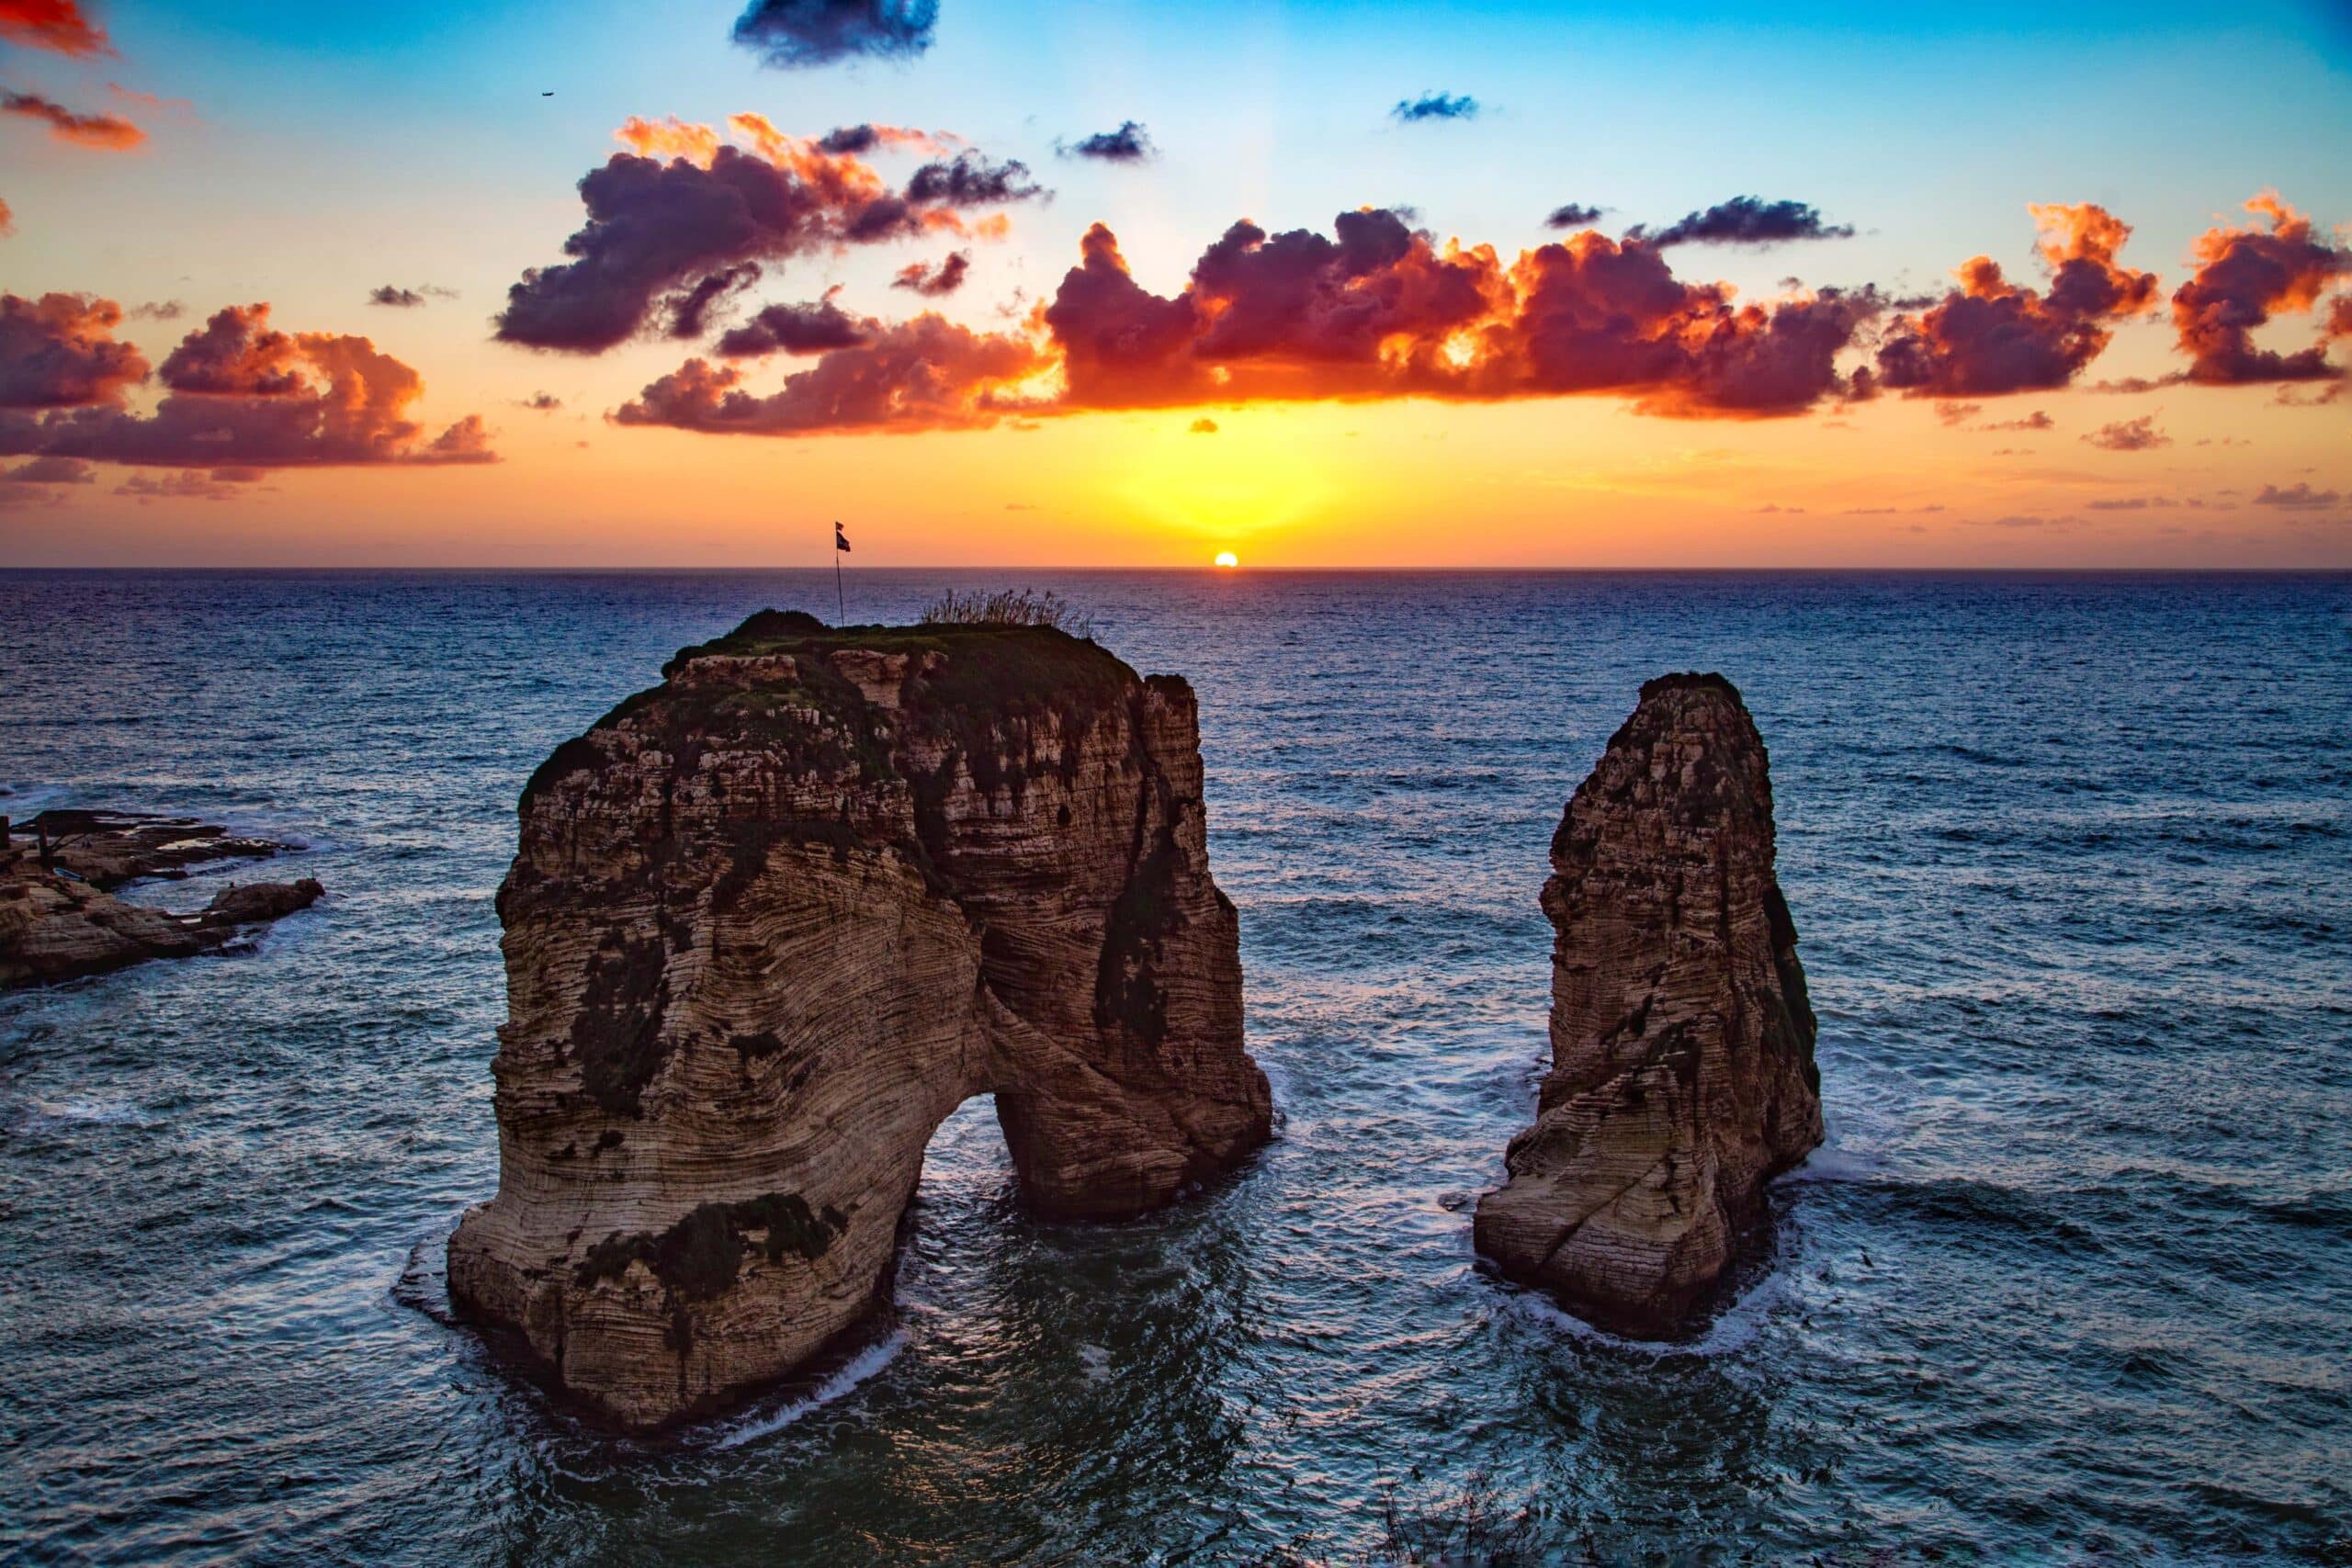 5 secrets of the capital of Lebanon you'd never guess